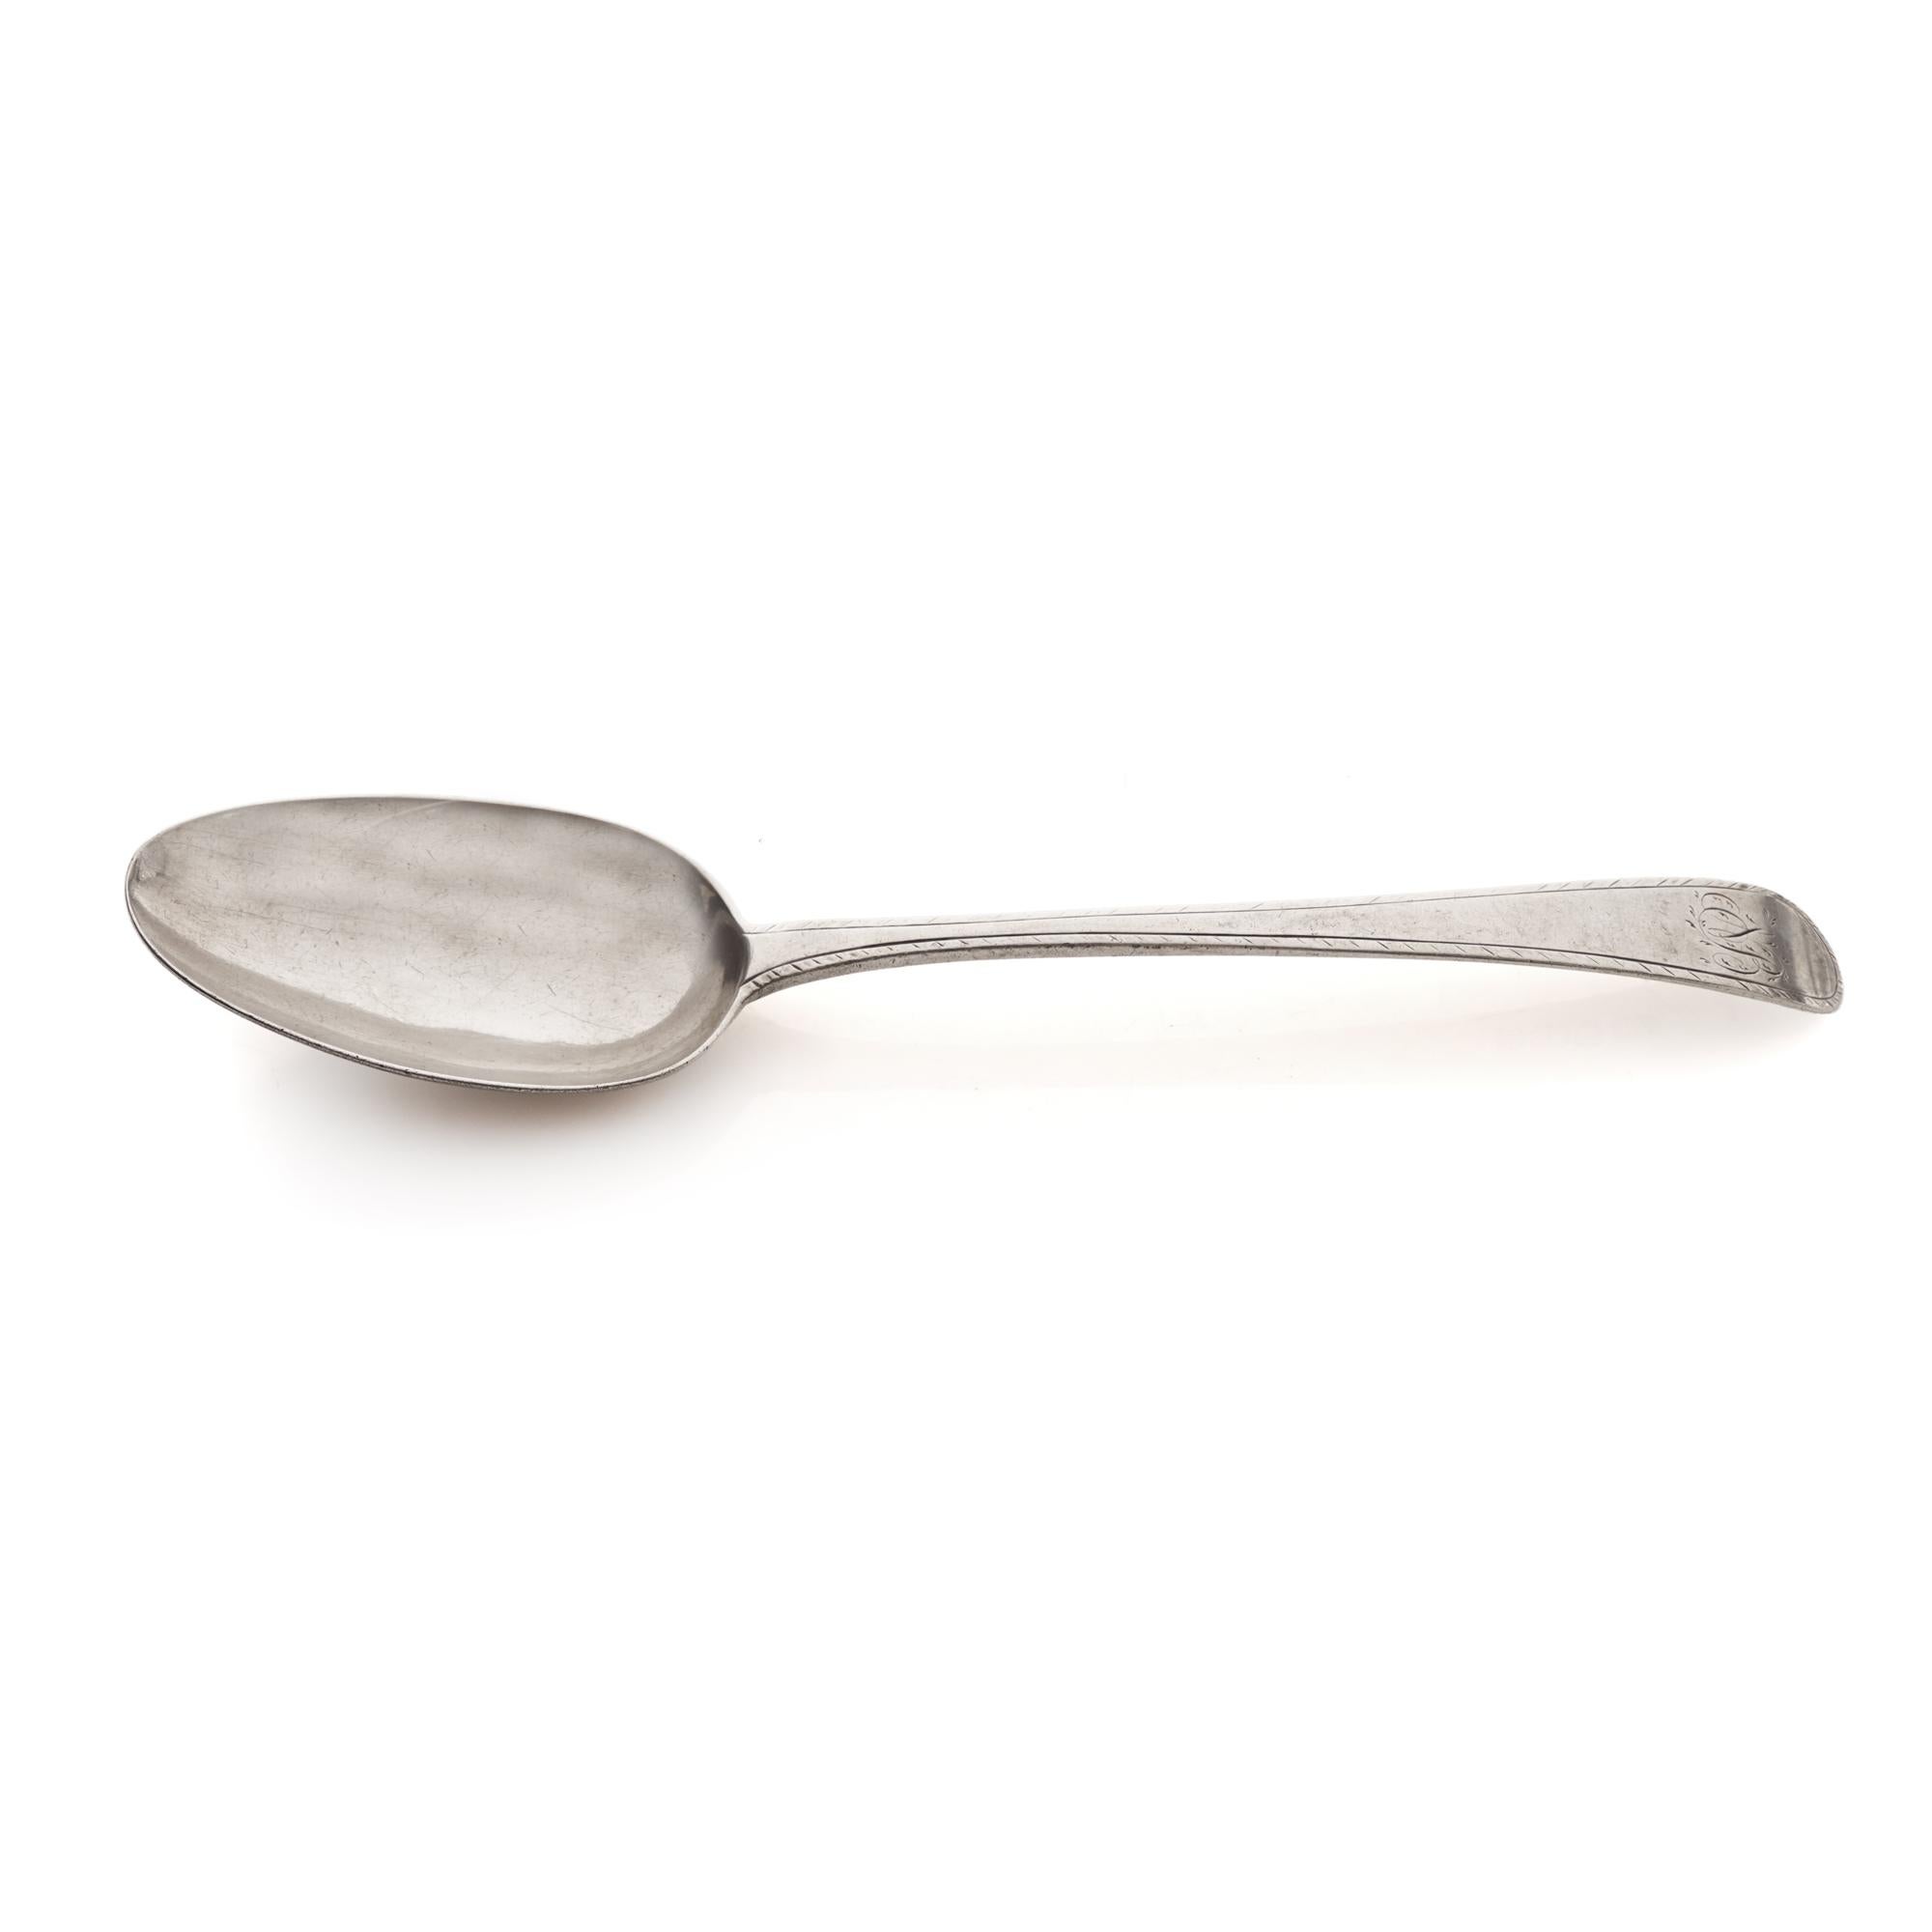 British Antique Georgian sterling 925 silver large spoon by Hester Bateman For Sale